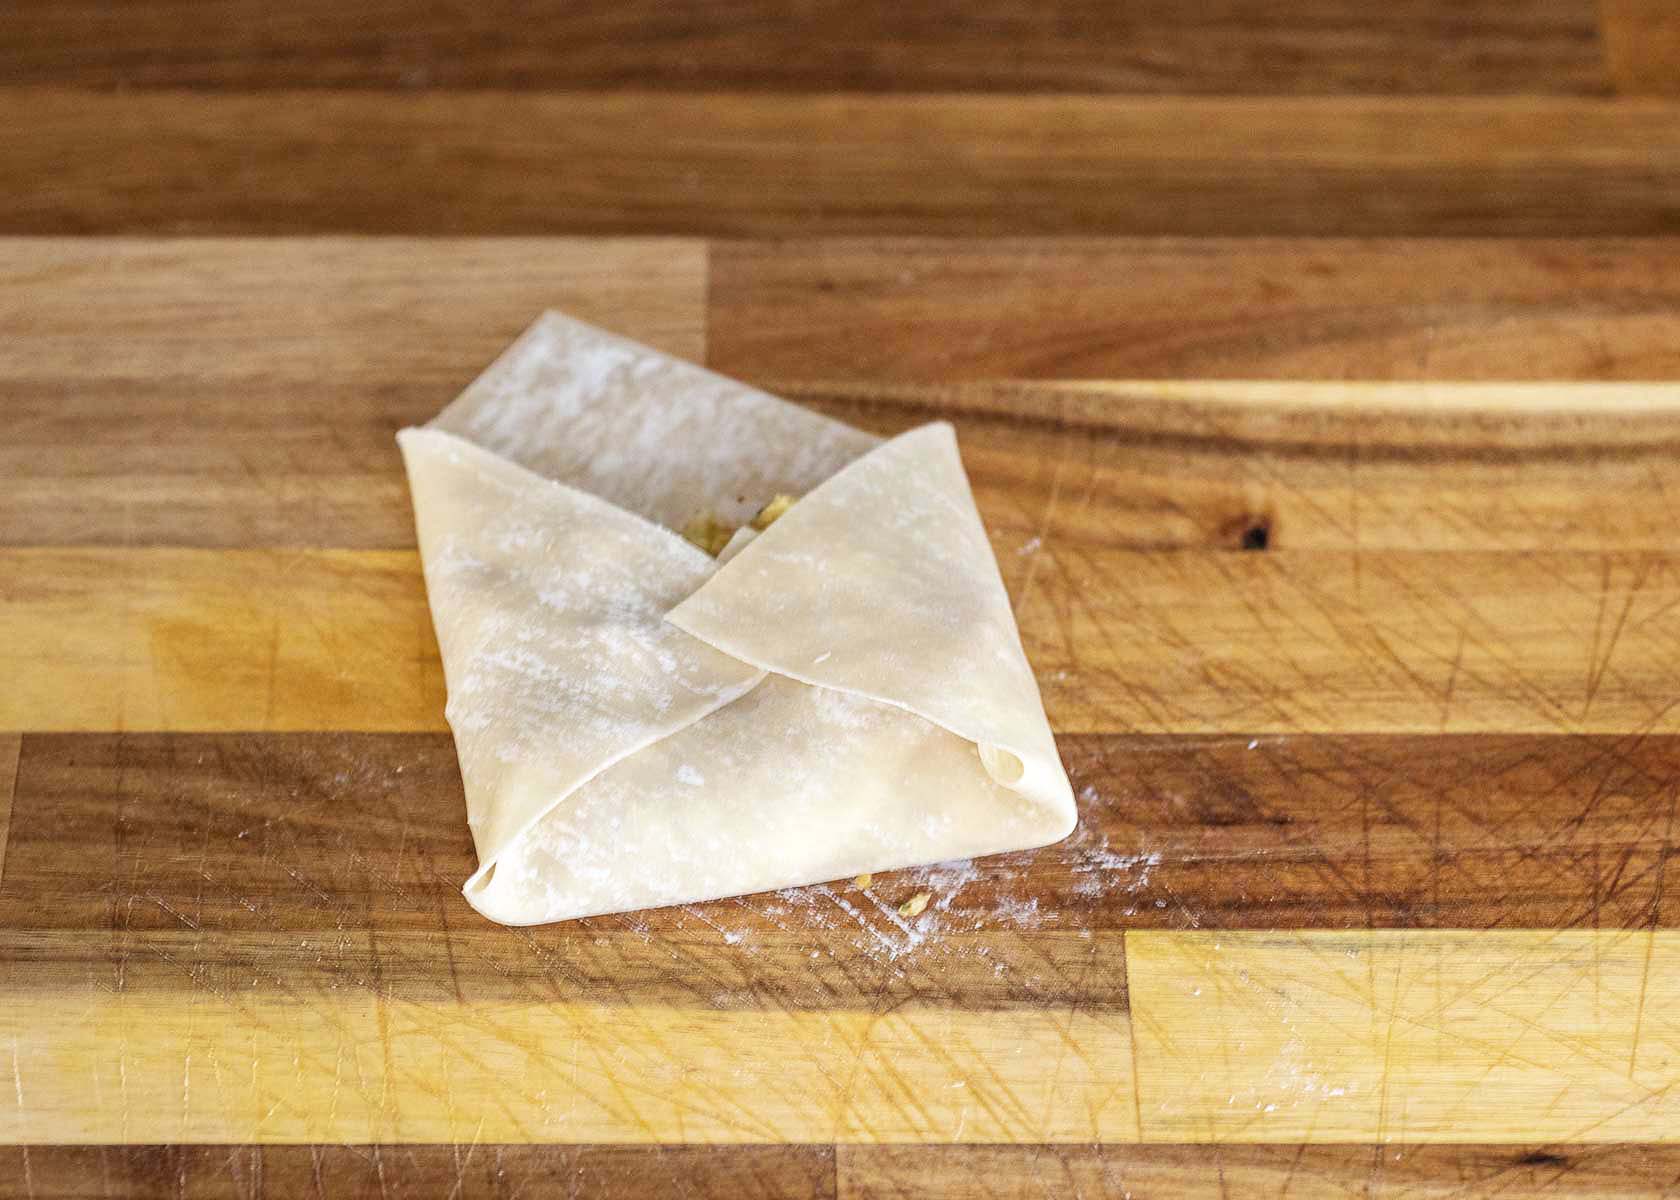 Folding in the left and right corners of the egg roll wrapper.